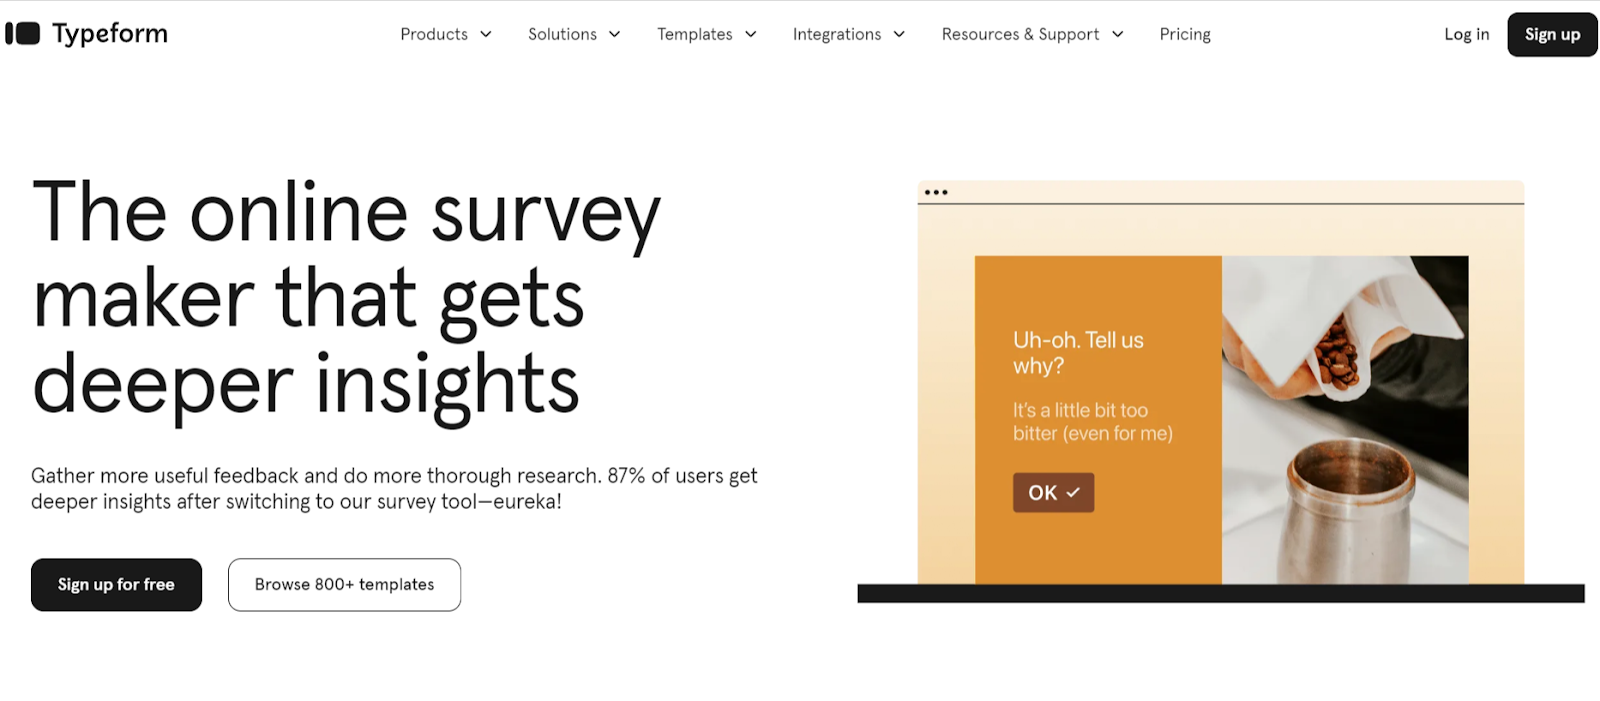 Typeform is the best Best for Personalized Surveys